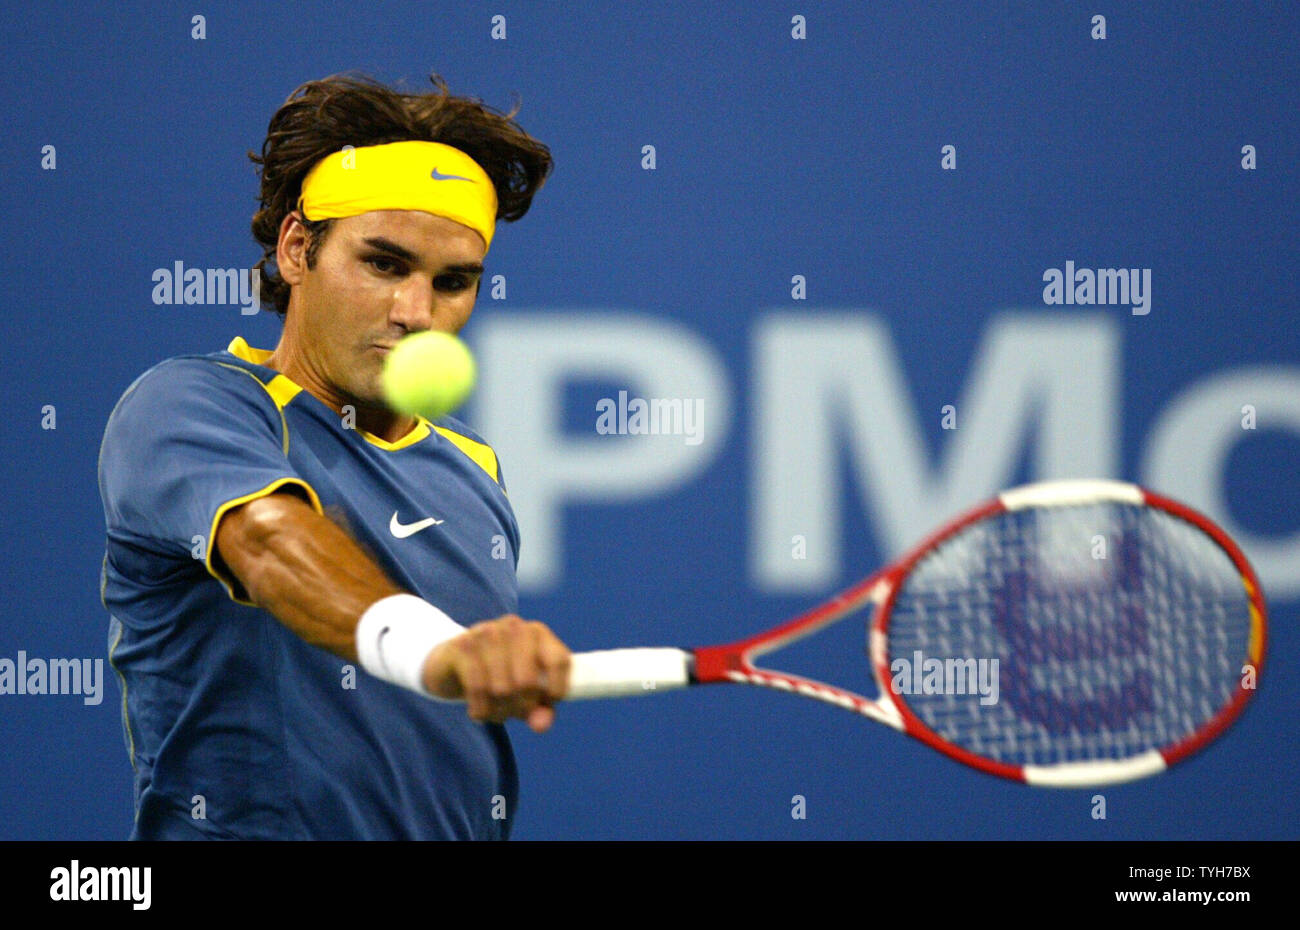 Roger Federer (SUI) hits a backhand in his match against Olivier Rochus (BEL) during night 7 at the US Open in Flushing Meadows, New York on September 4, 2005